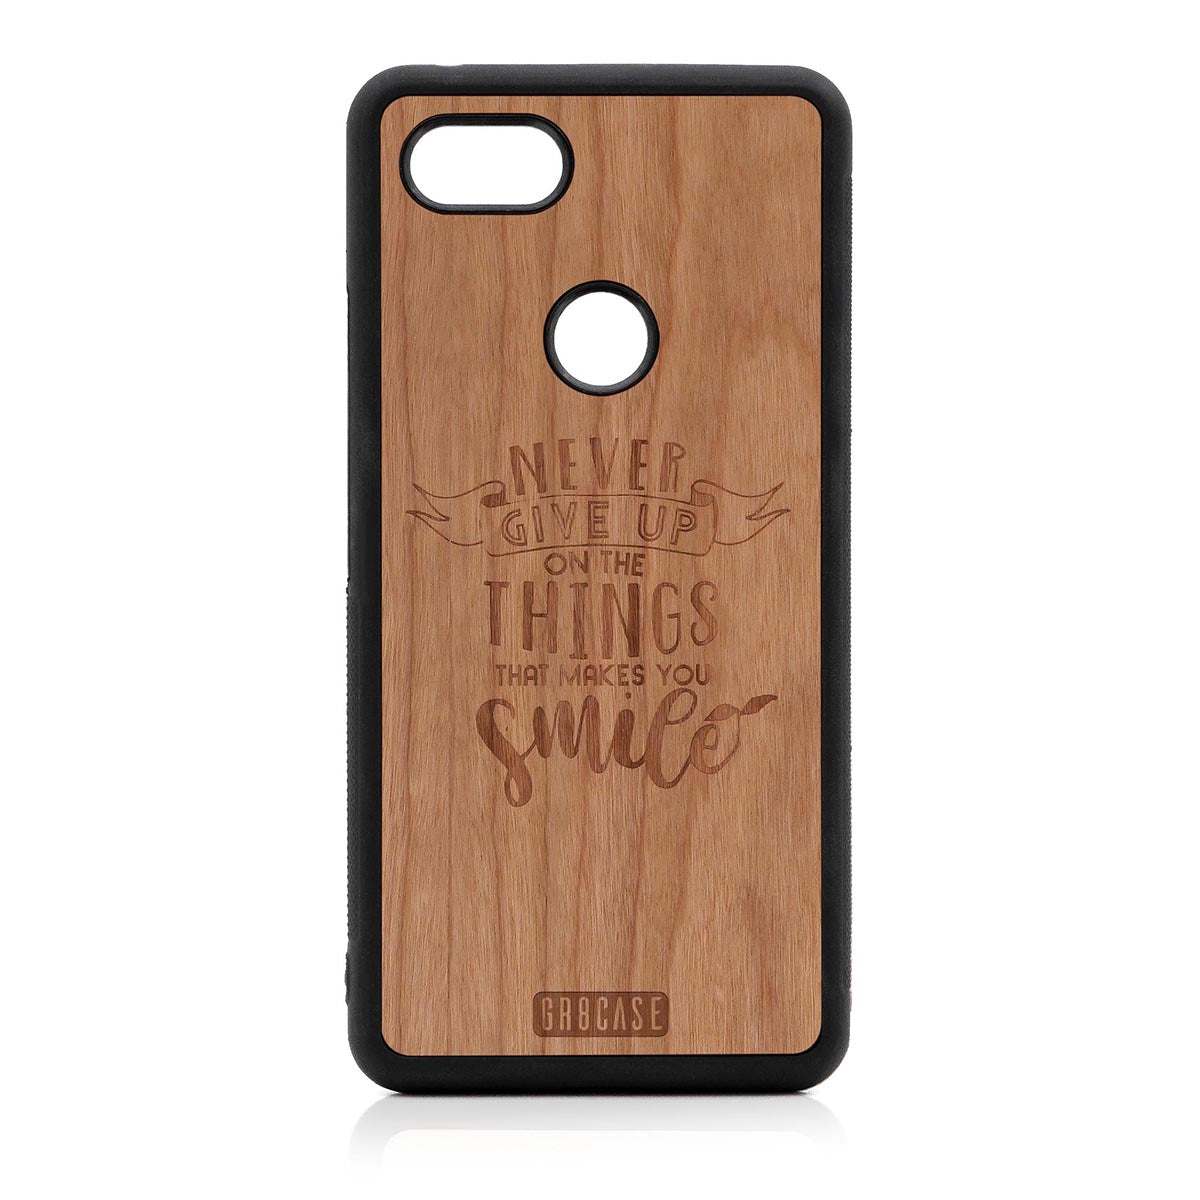 Never Give Up On The Things That Makes You Smile Design Wood Case Google Pixel 3 XL by GR8CASE